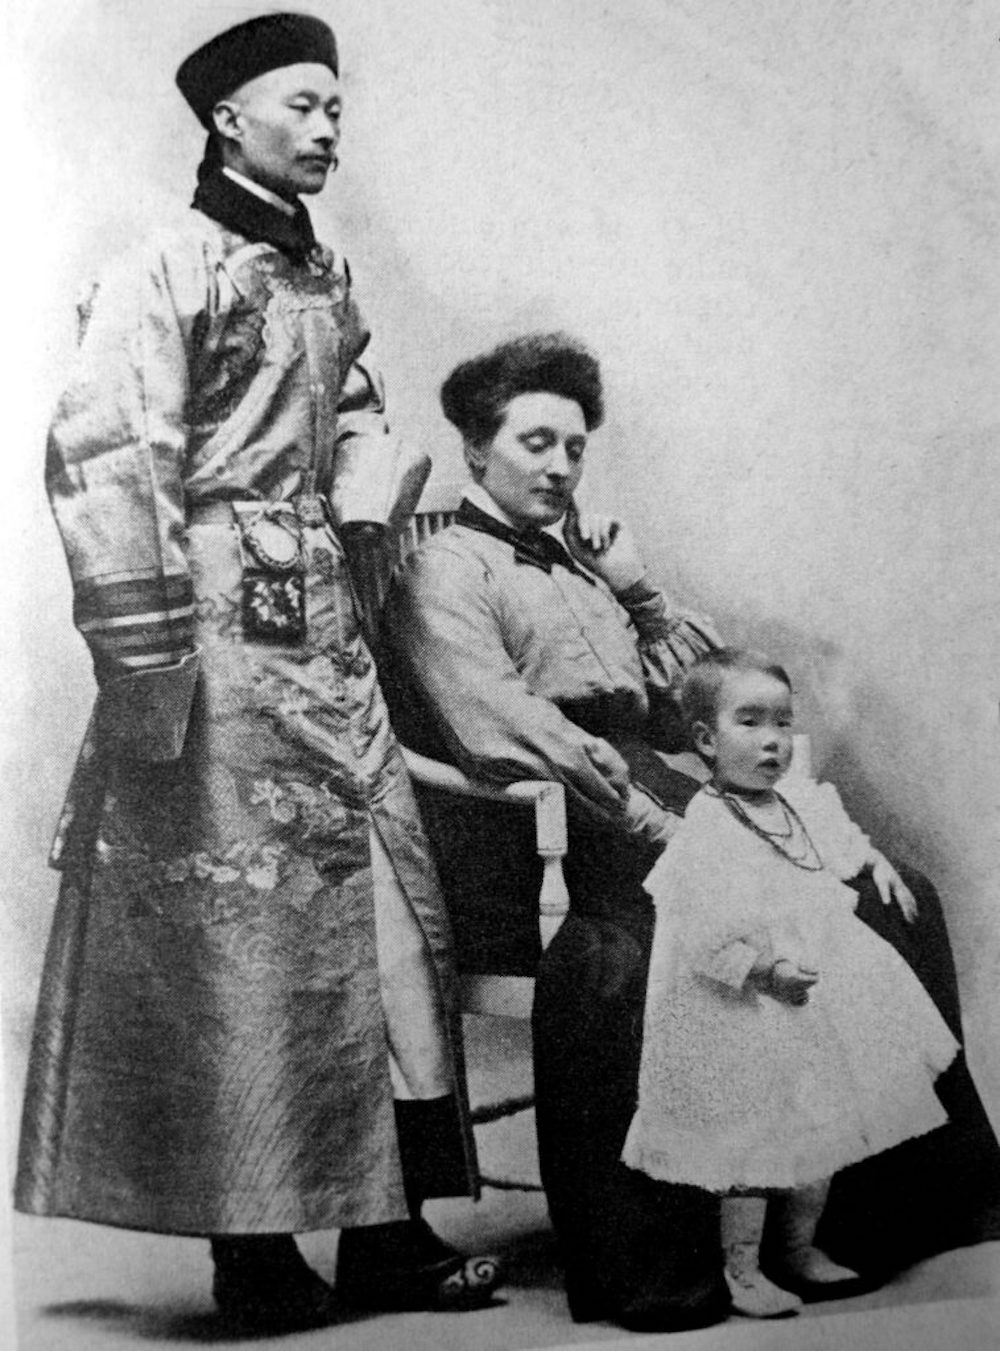 A portrait of a family in 1910s China, the husband standing on the left, his wife sitting midframe, his daughter standing on the right